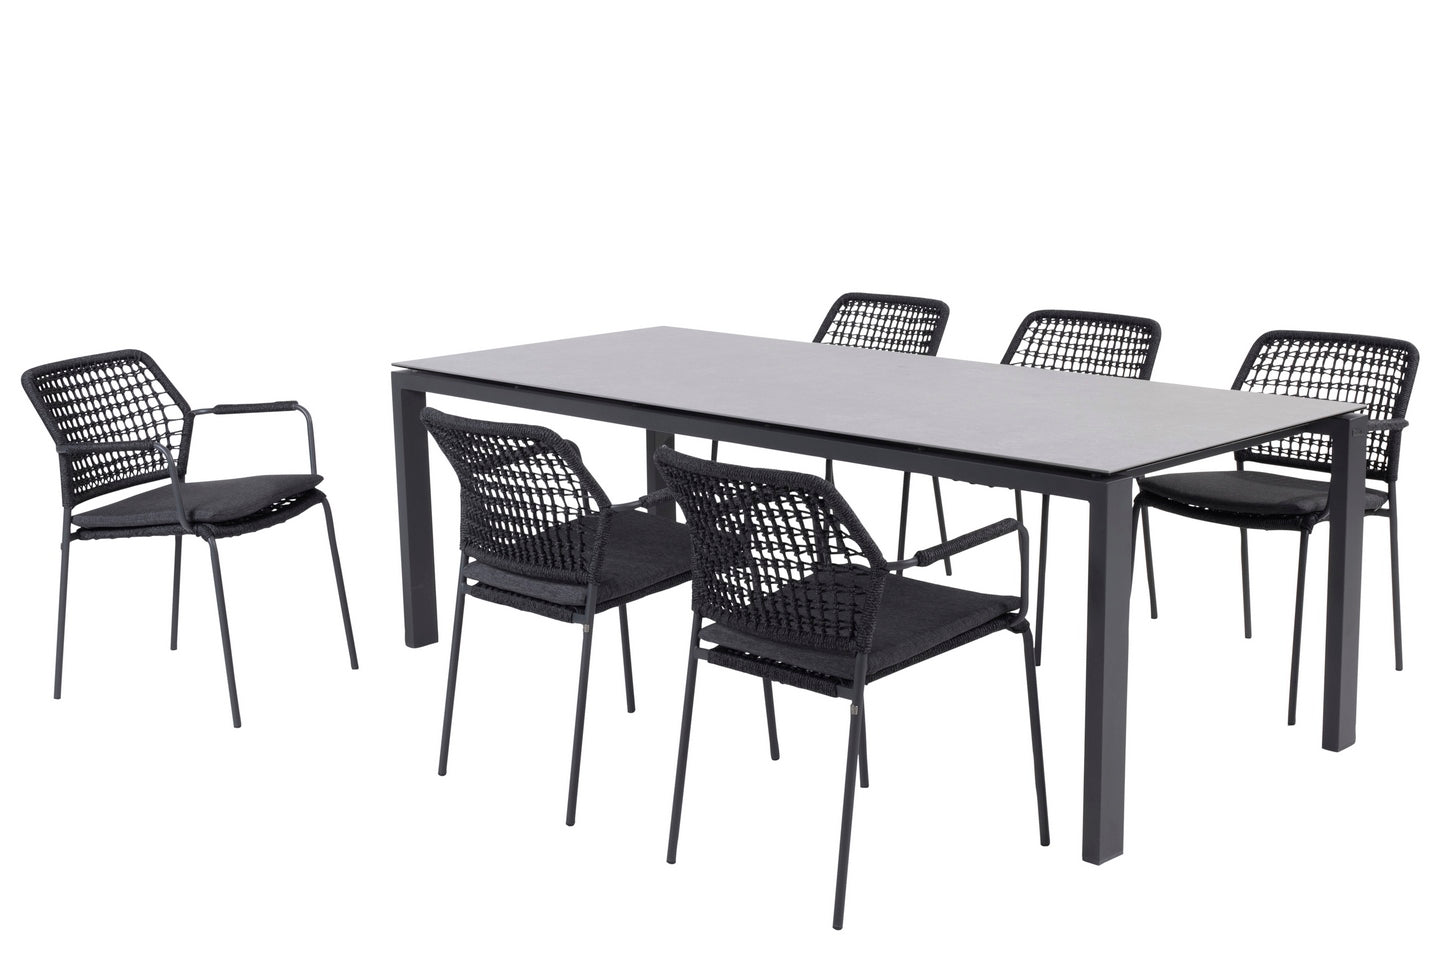 4 Seasons Outdoor Barista Dining With Goa 220cm Hpl Table Set